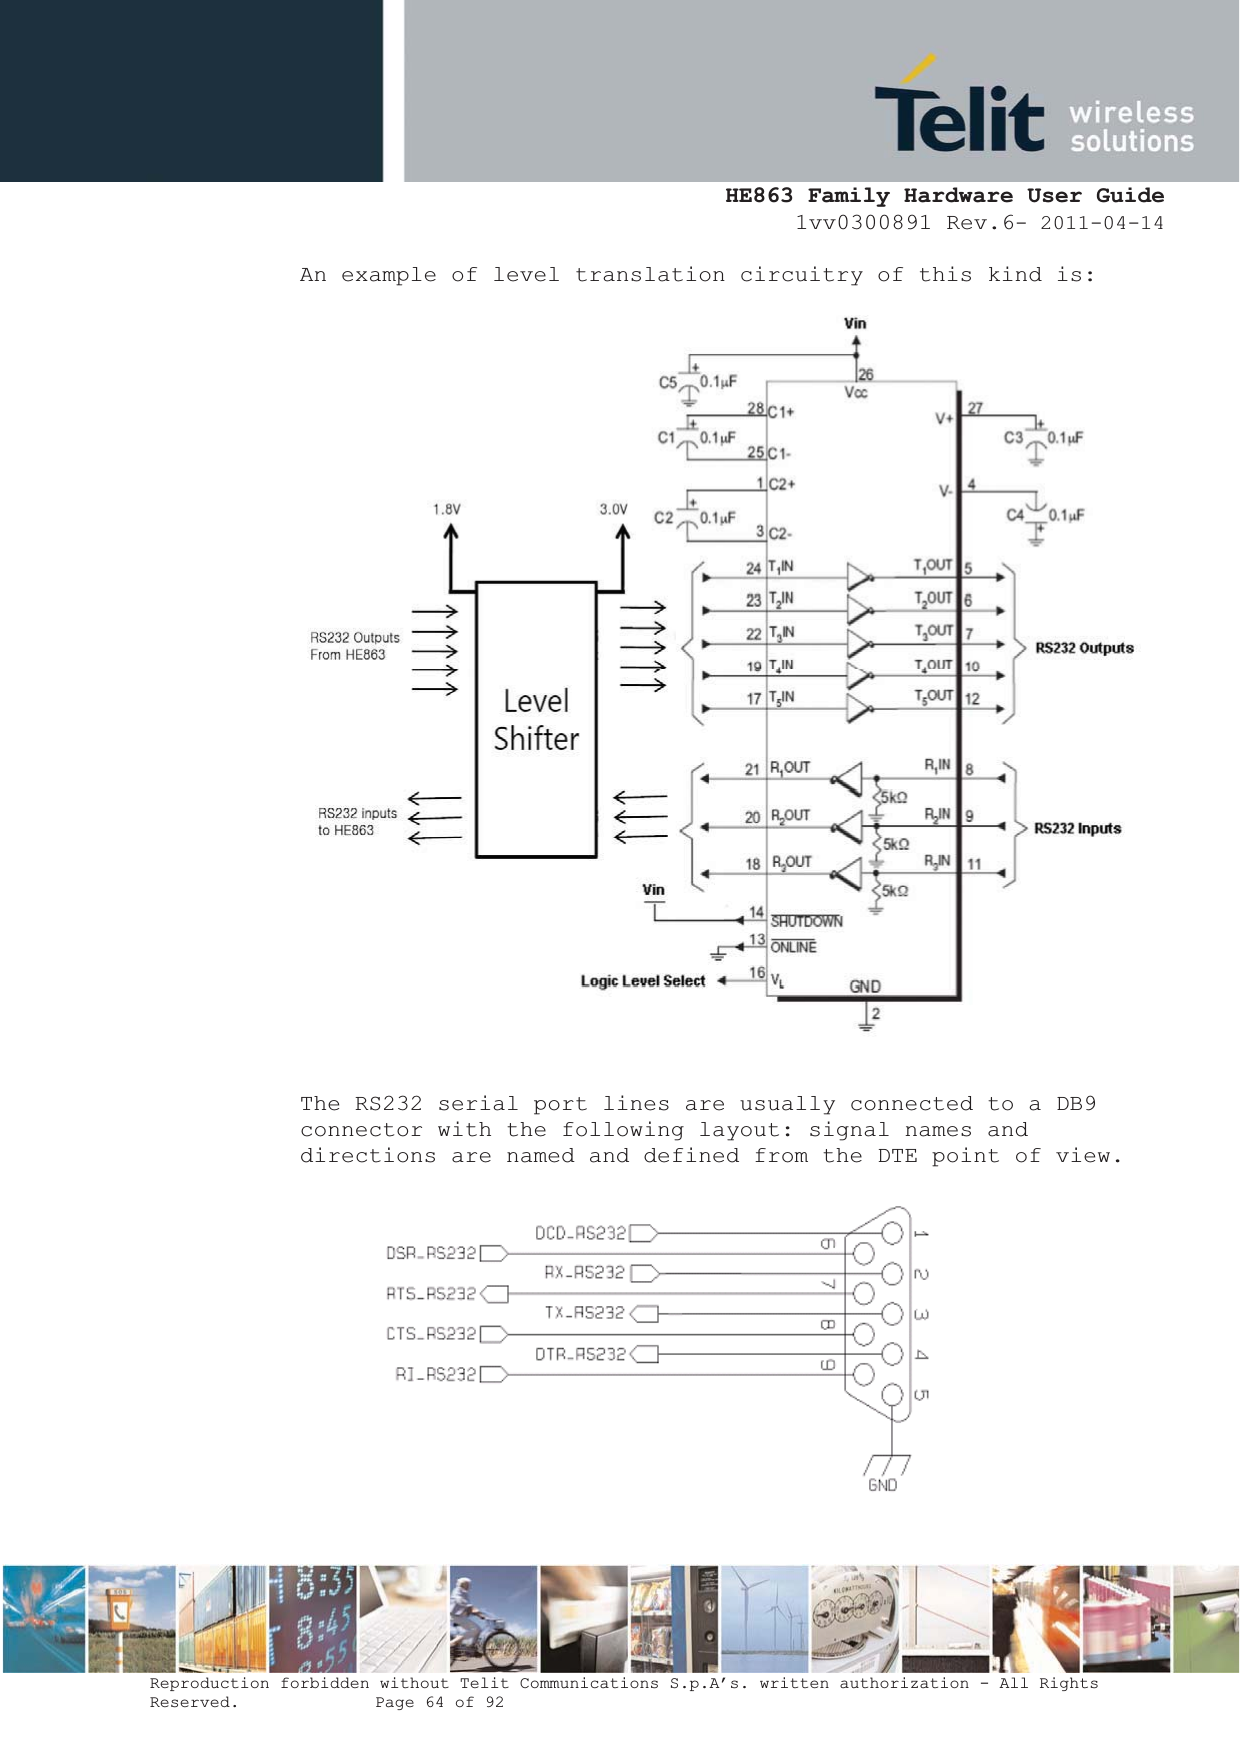  HE863 Family Hardware User Guide 1vv0300891 Rev.6- 2011-04-14    Reproduction forbidden without Telit Communications S.p.A’s. written authorization - All Rights Reserved.    Page 64 of 92  An example of level translation circuitry of this kind is:   The RS232 serial port lines are usually connected to a DB9 connector with the following layout: signal names and directions are named and defined from the DTE point of view.  